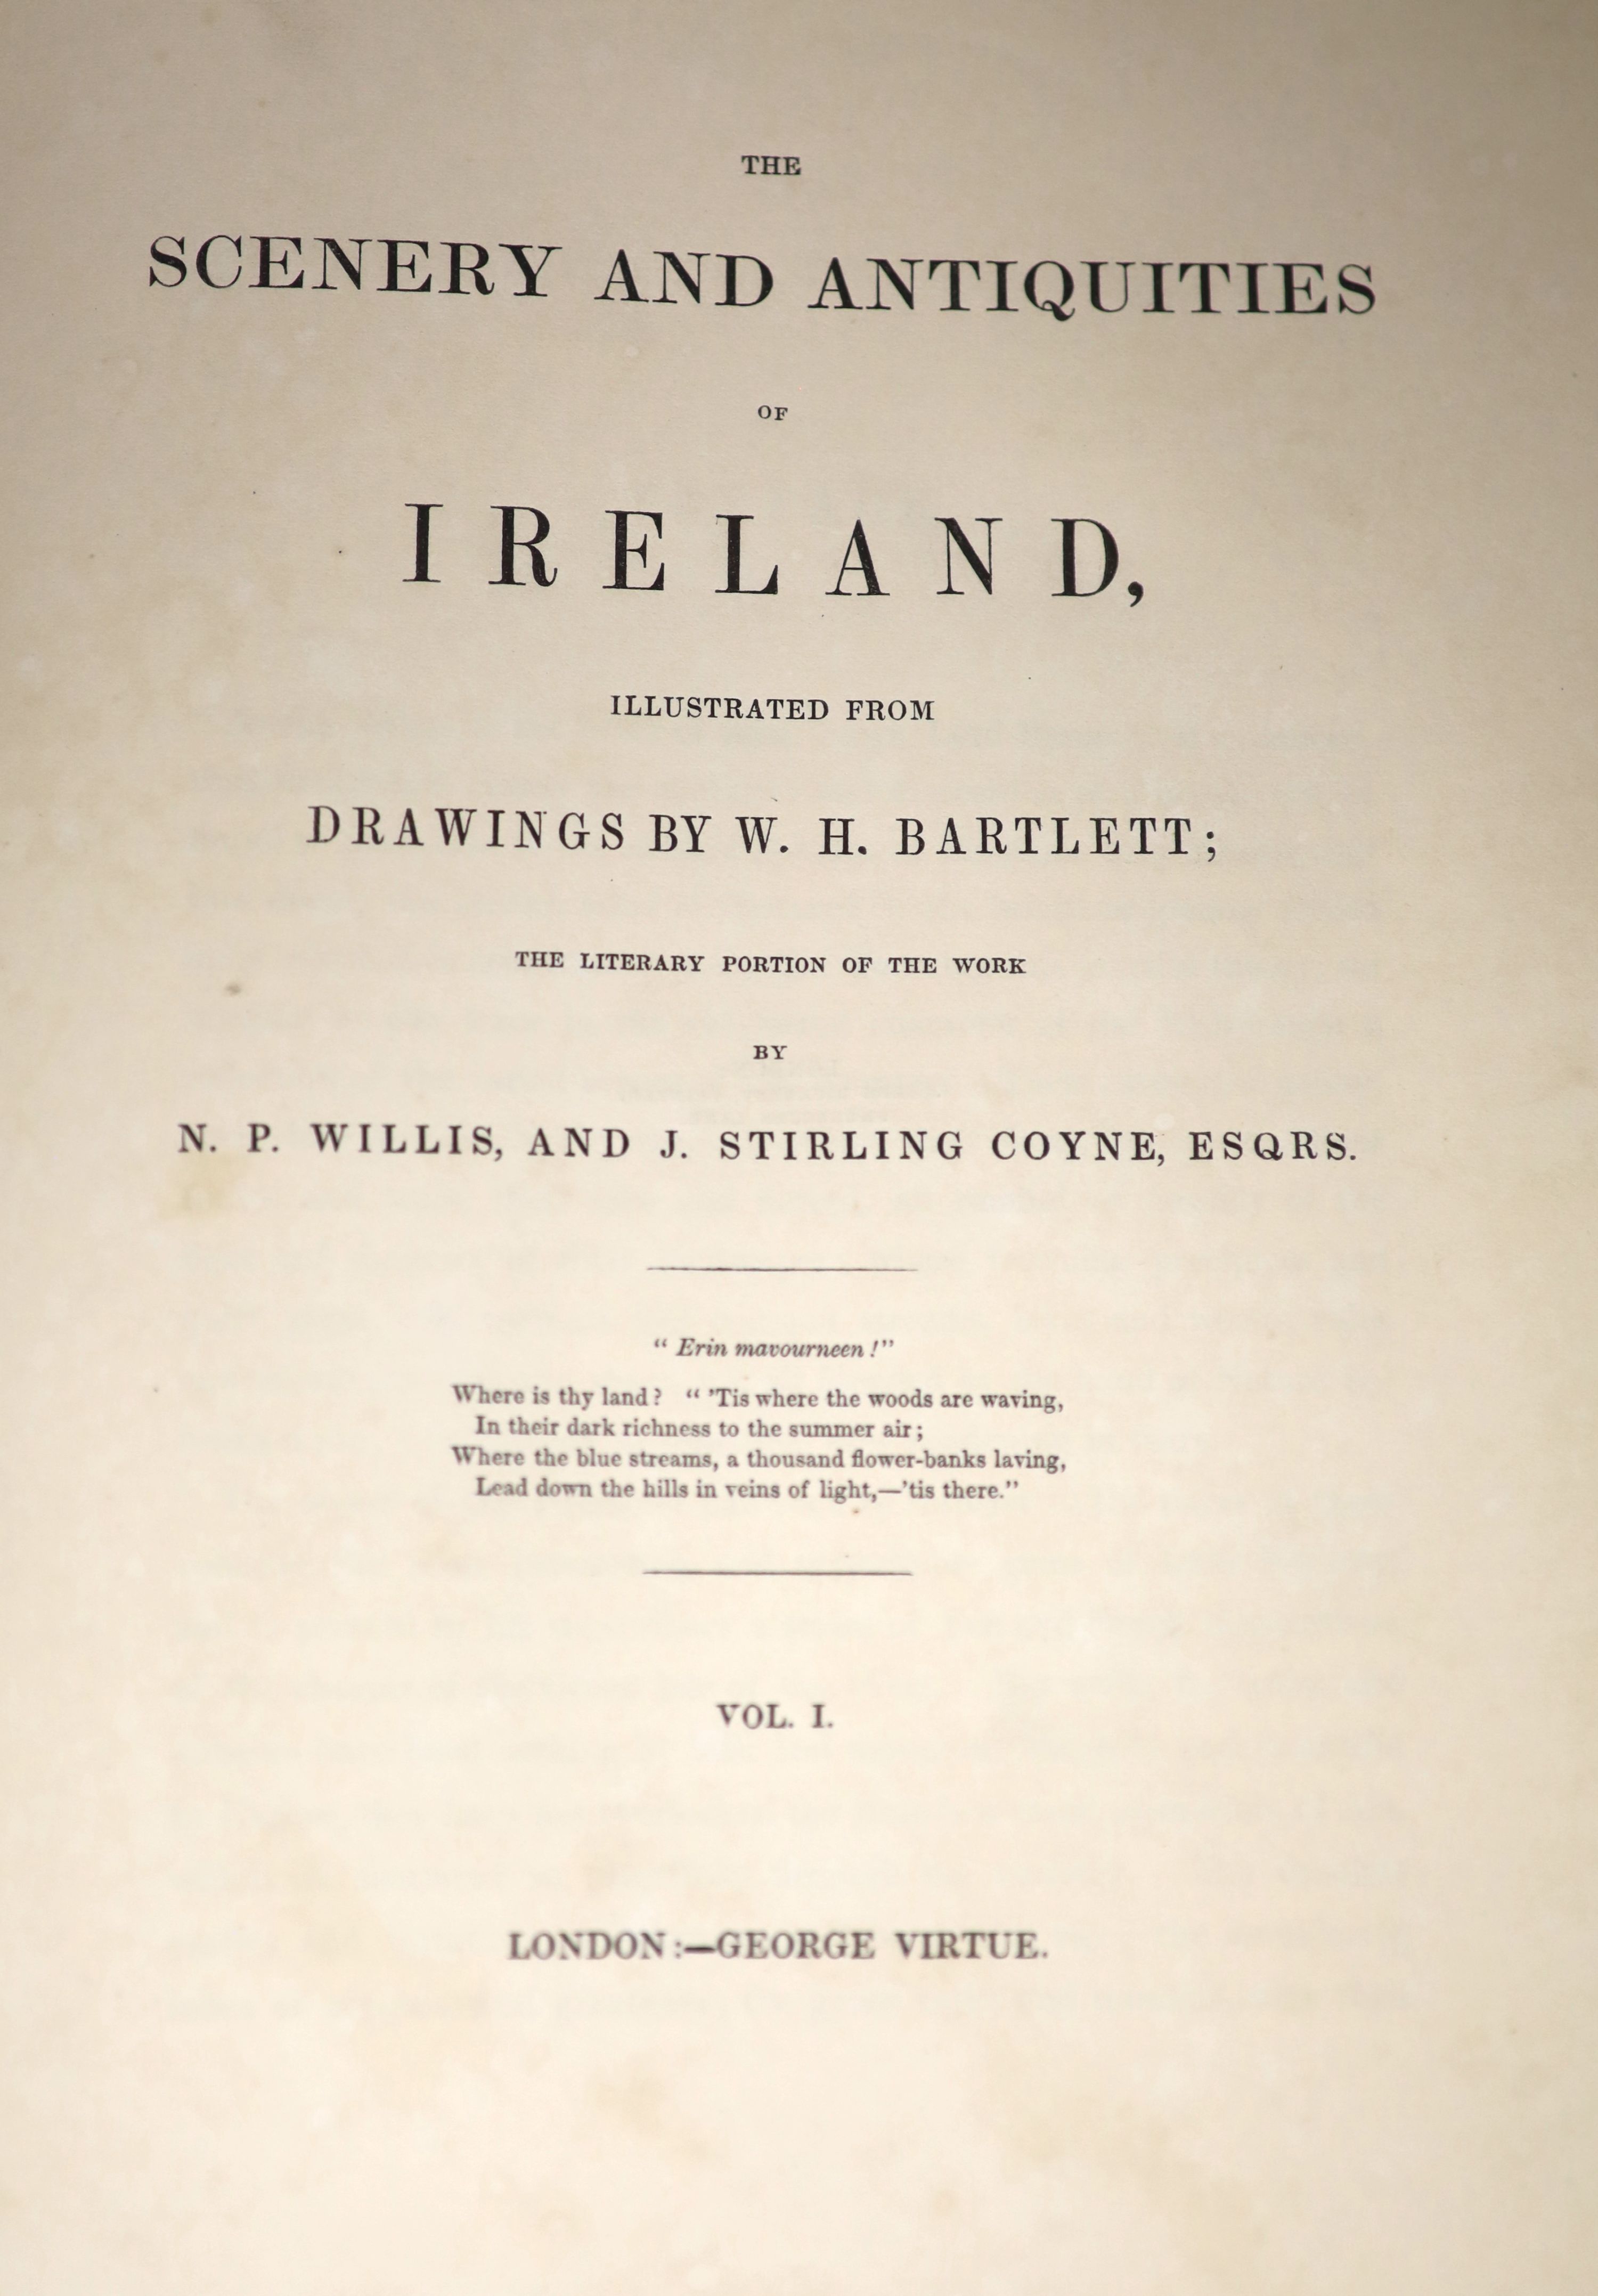 Willis, N.P. & Coyne, J. Stirling - The Scenery and Antiquities of Ireland, 2 vols, engraved pictorial and printed titles, map and 118 plates (by W.H. Bartlett); later 19th century gilt half morocco and patterned boards